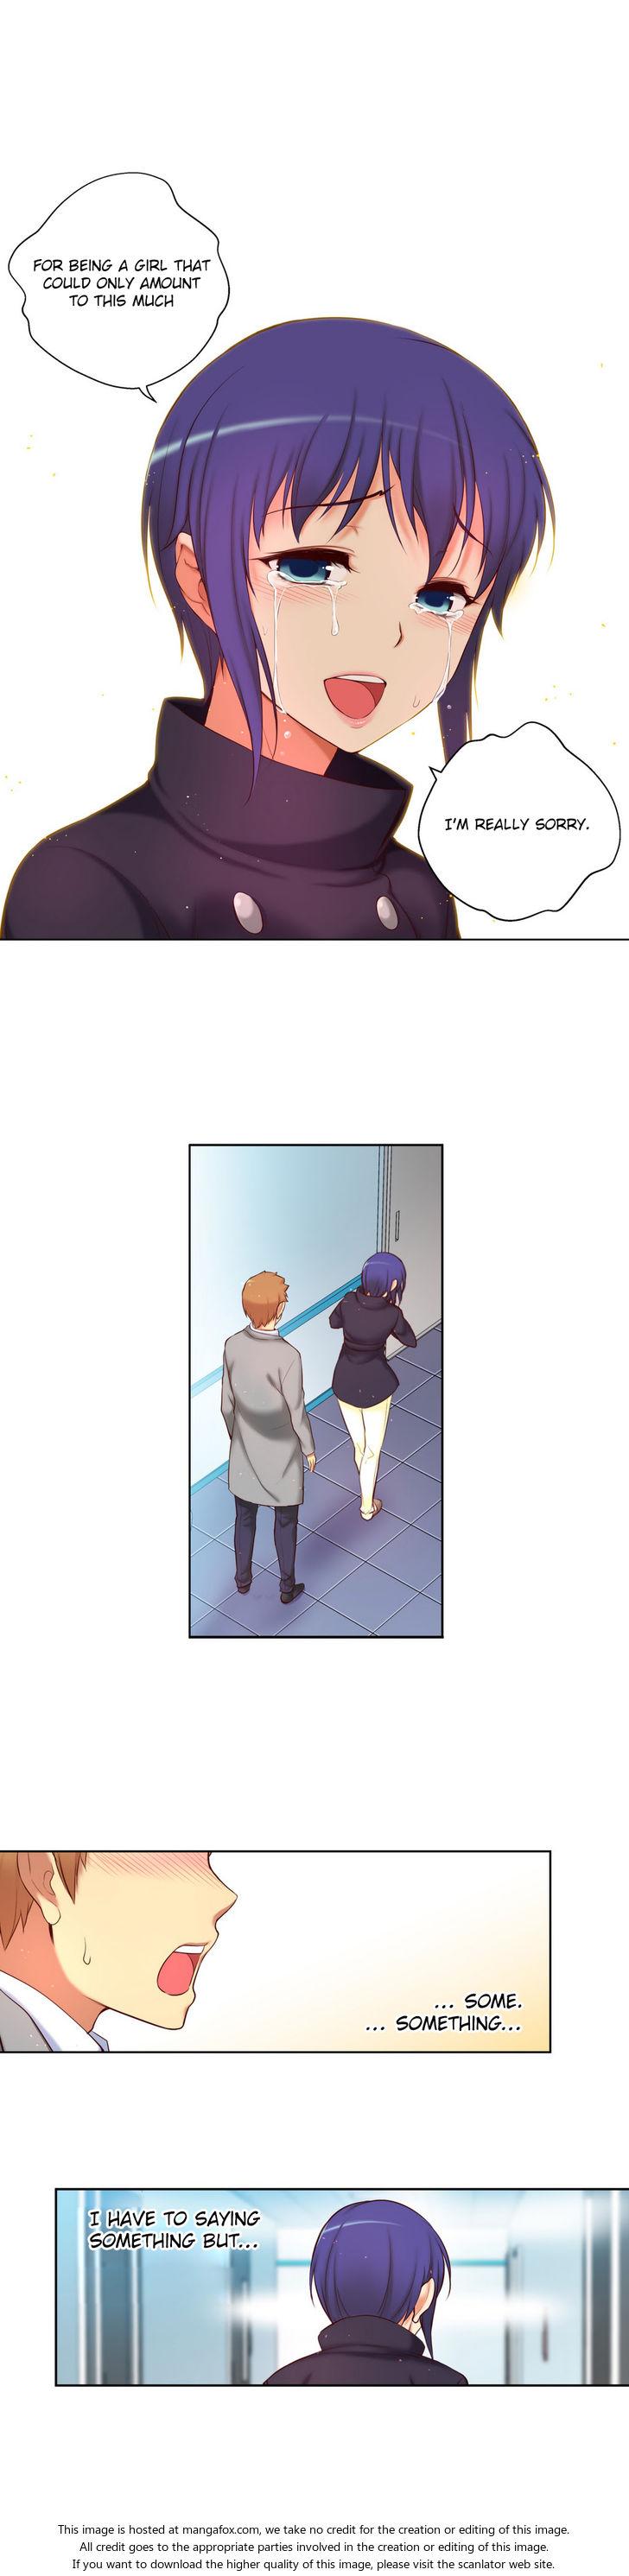 [Donggul Gom] She is Young (English) Part 1/2 954